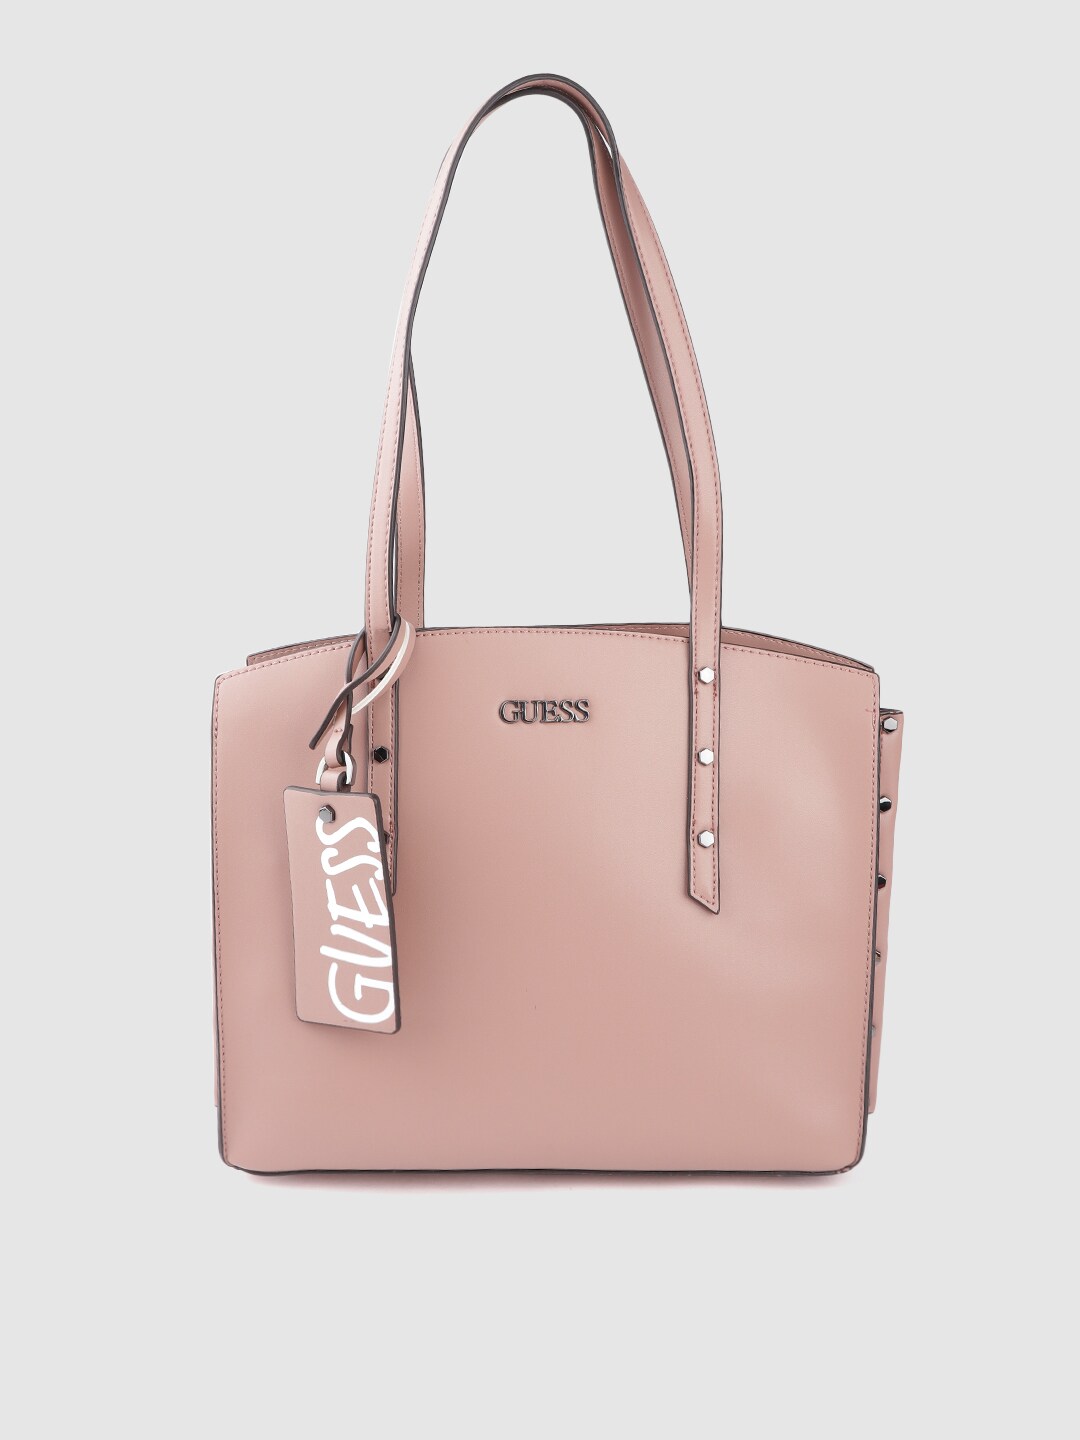 GUESS Peach-Coloured Solid Shoulder Bag Price in India